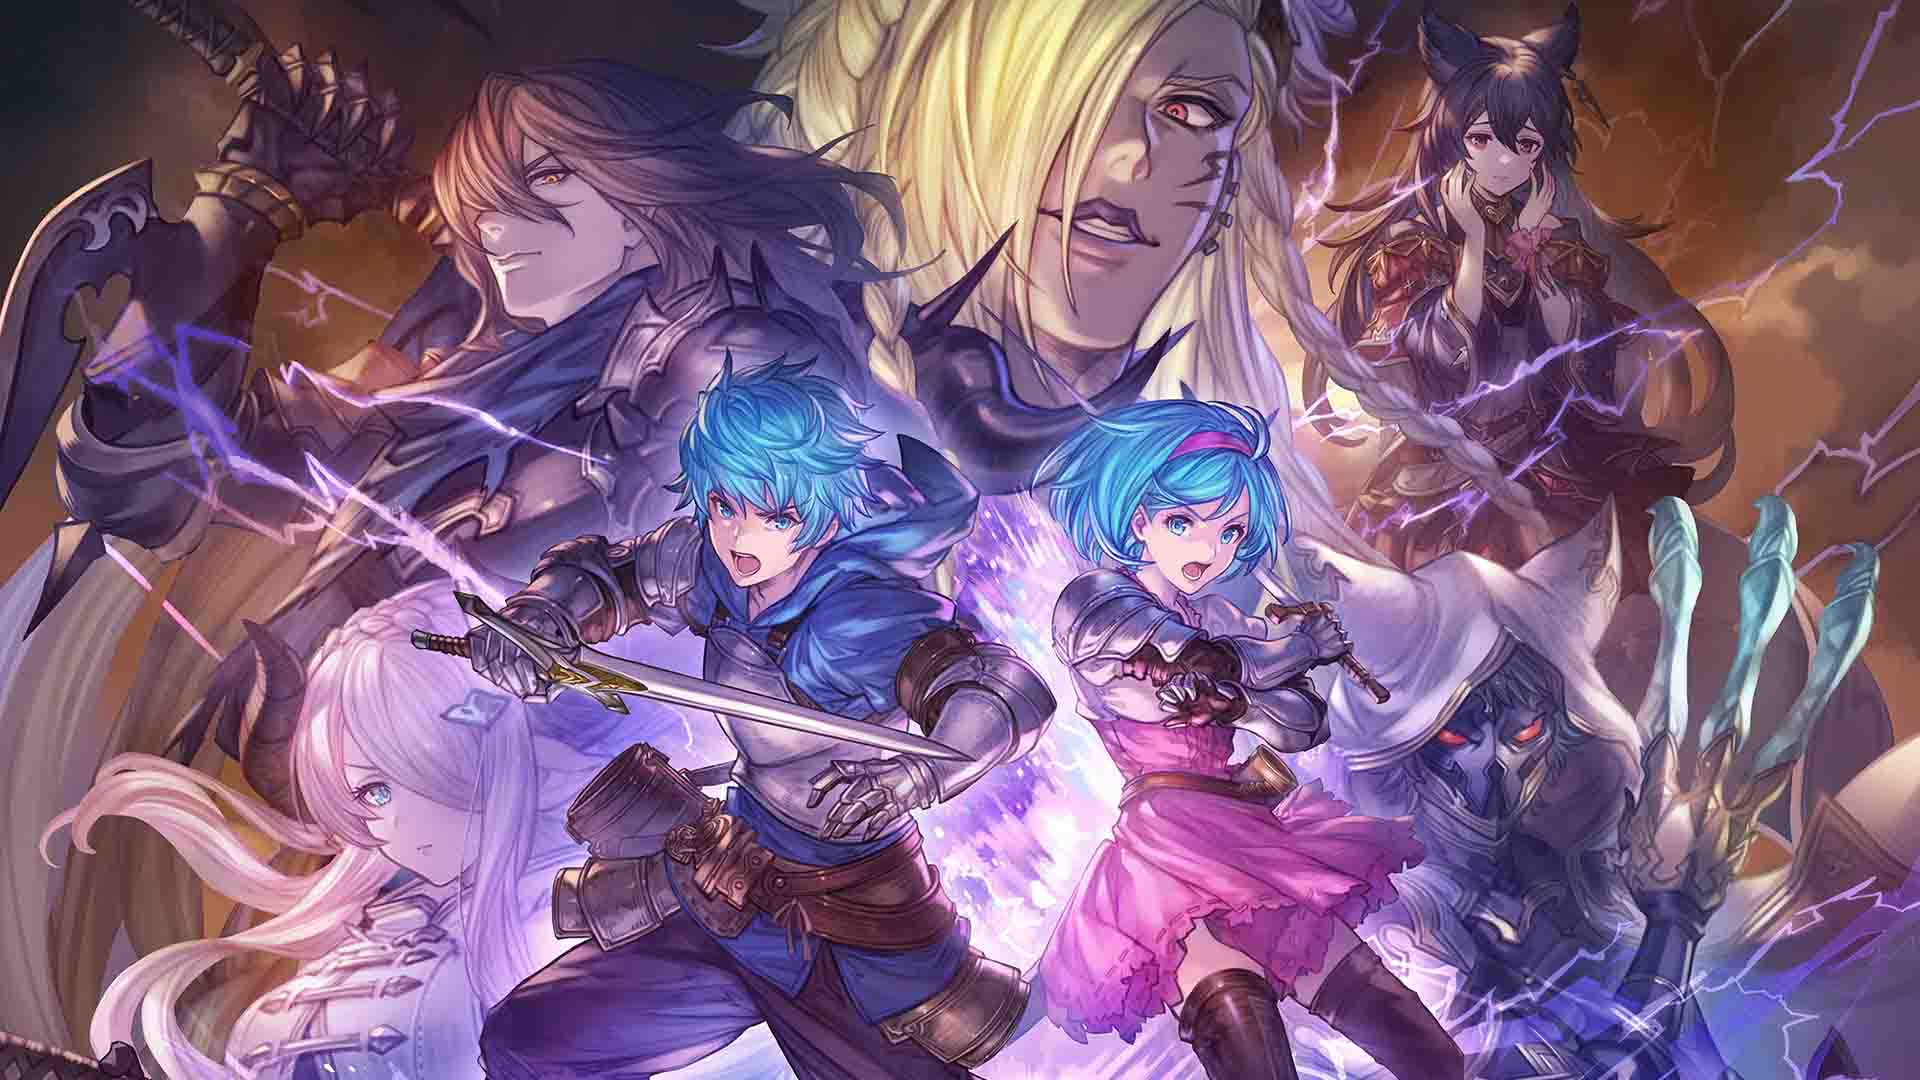 Granblue Fantasy Versus: Rising promises to expand on its